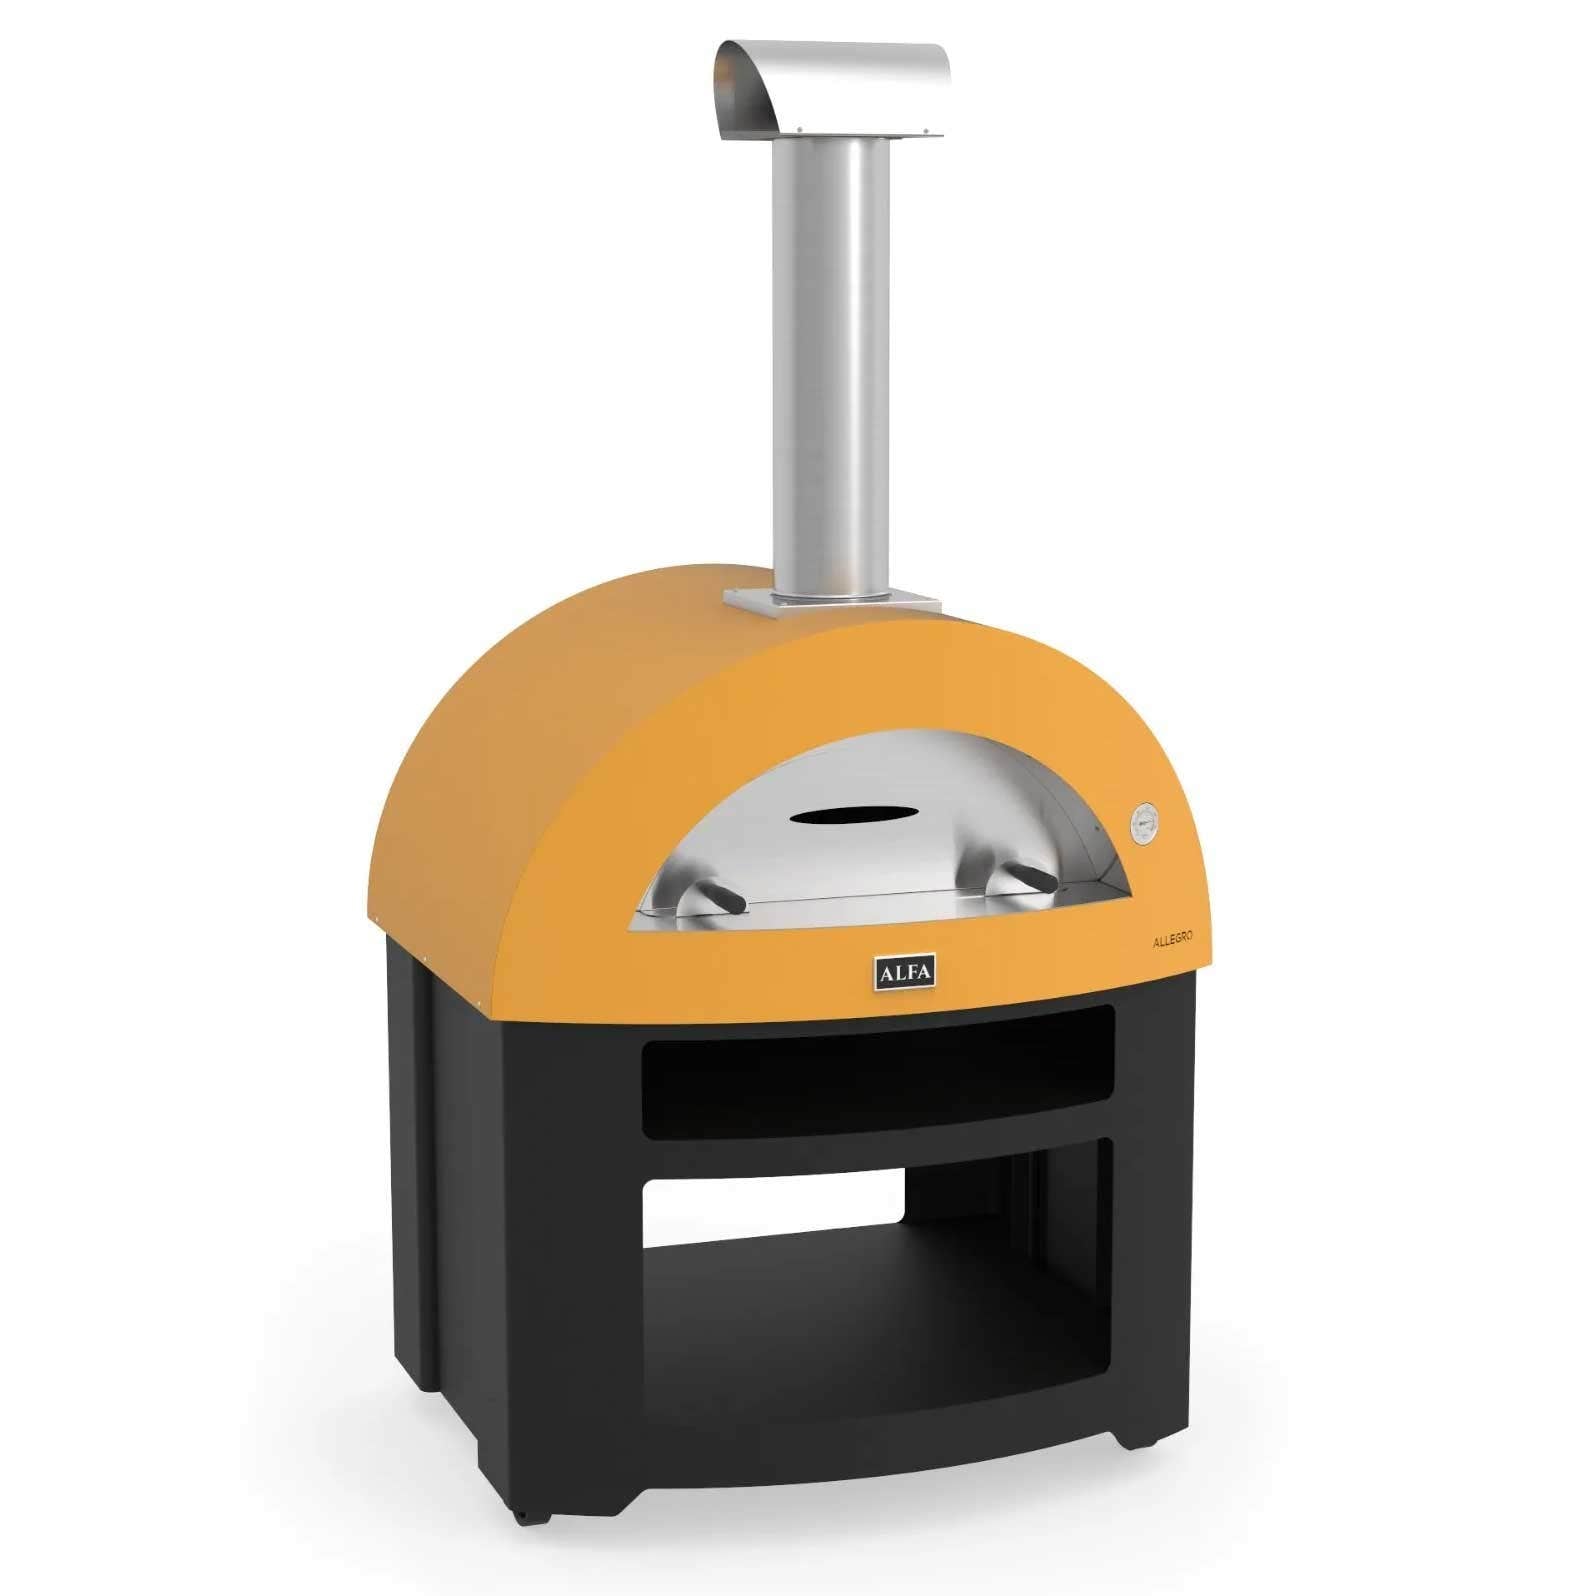 Alfa Allegro Wood Fired Pizza Oven with Base Pizza Makers & Ovens